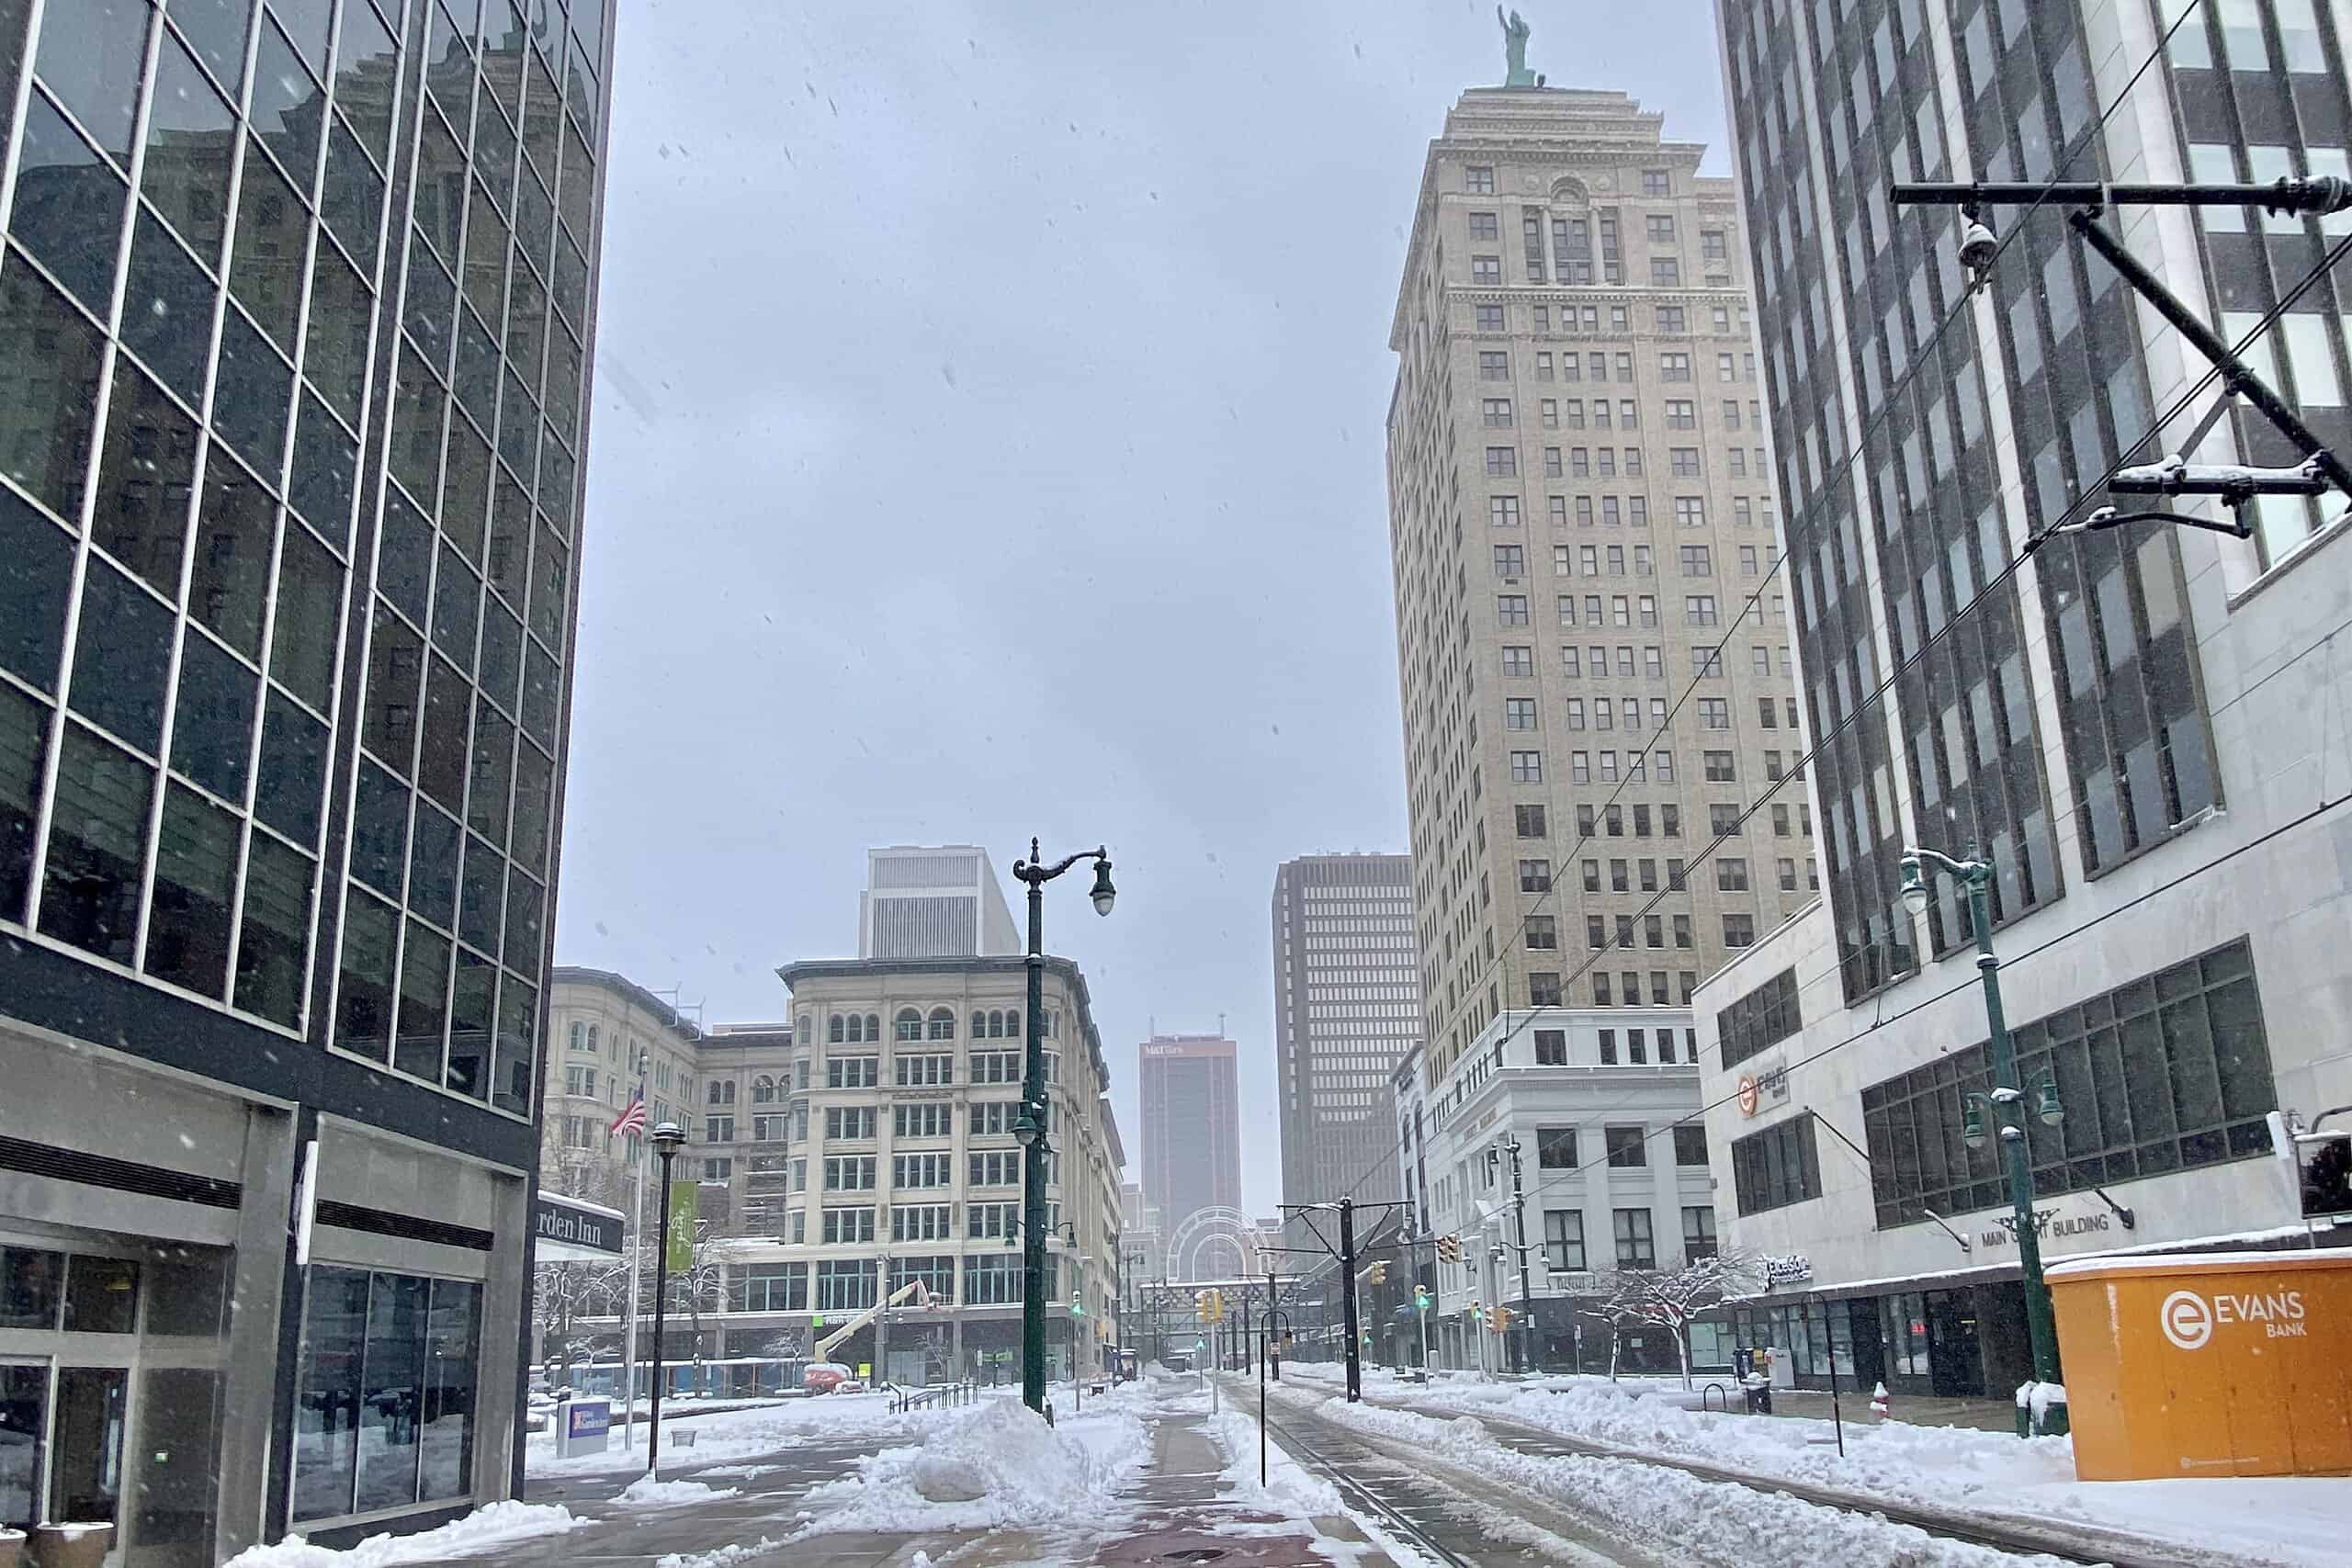 Looking southward along Main Street from just before Lafayette Square in downtown Buffalo, New York, on the first day of a two-day November 2022 winter storm by Andre Carrotflower